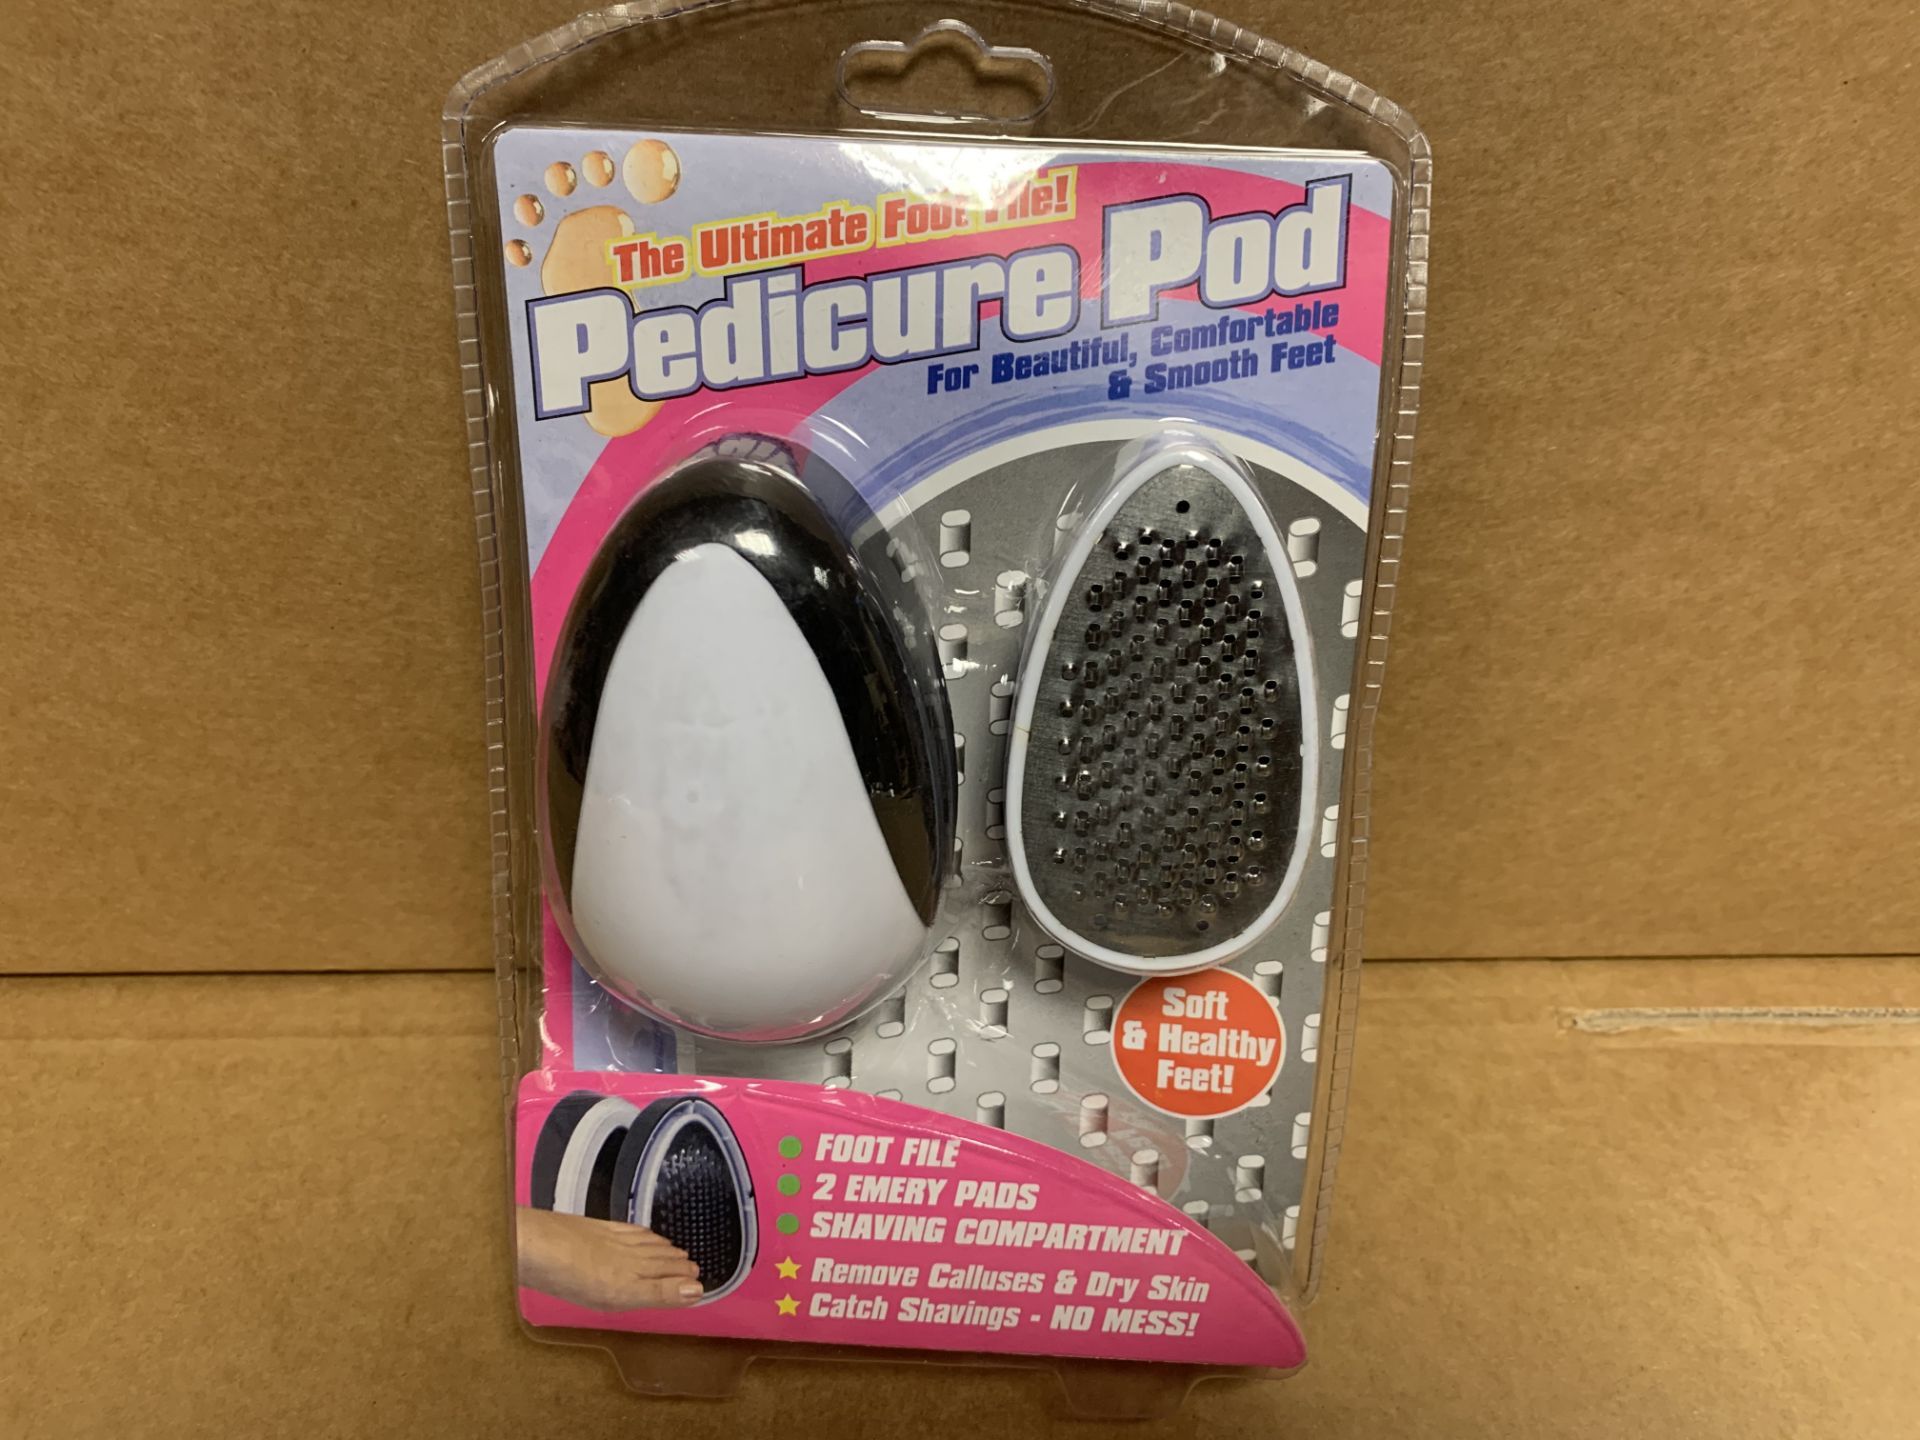 72 x NEW PACKAGED PEDICURE POD - THE ULTIMATE FOOT FILE. RRP £4.99 EACH (1270/20)